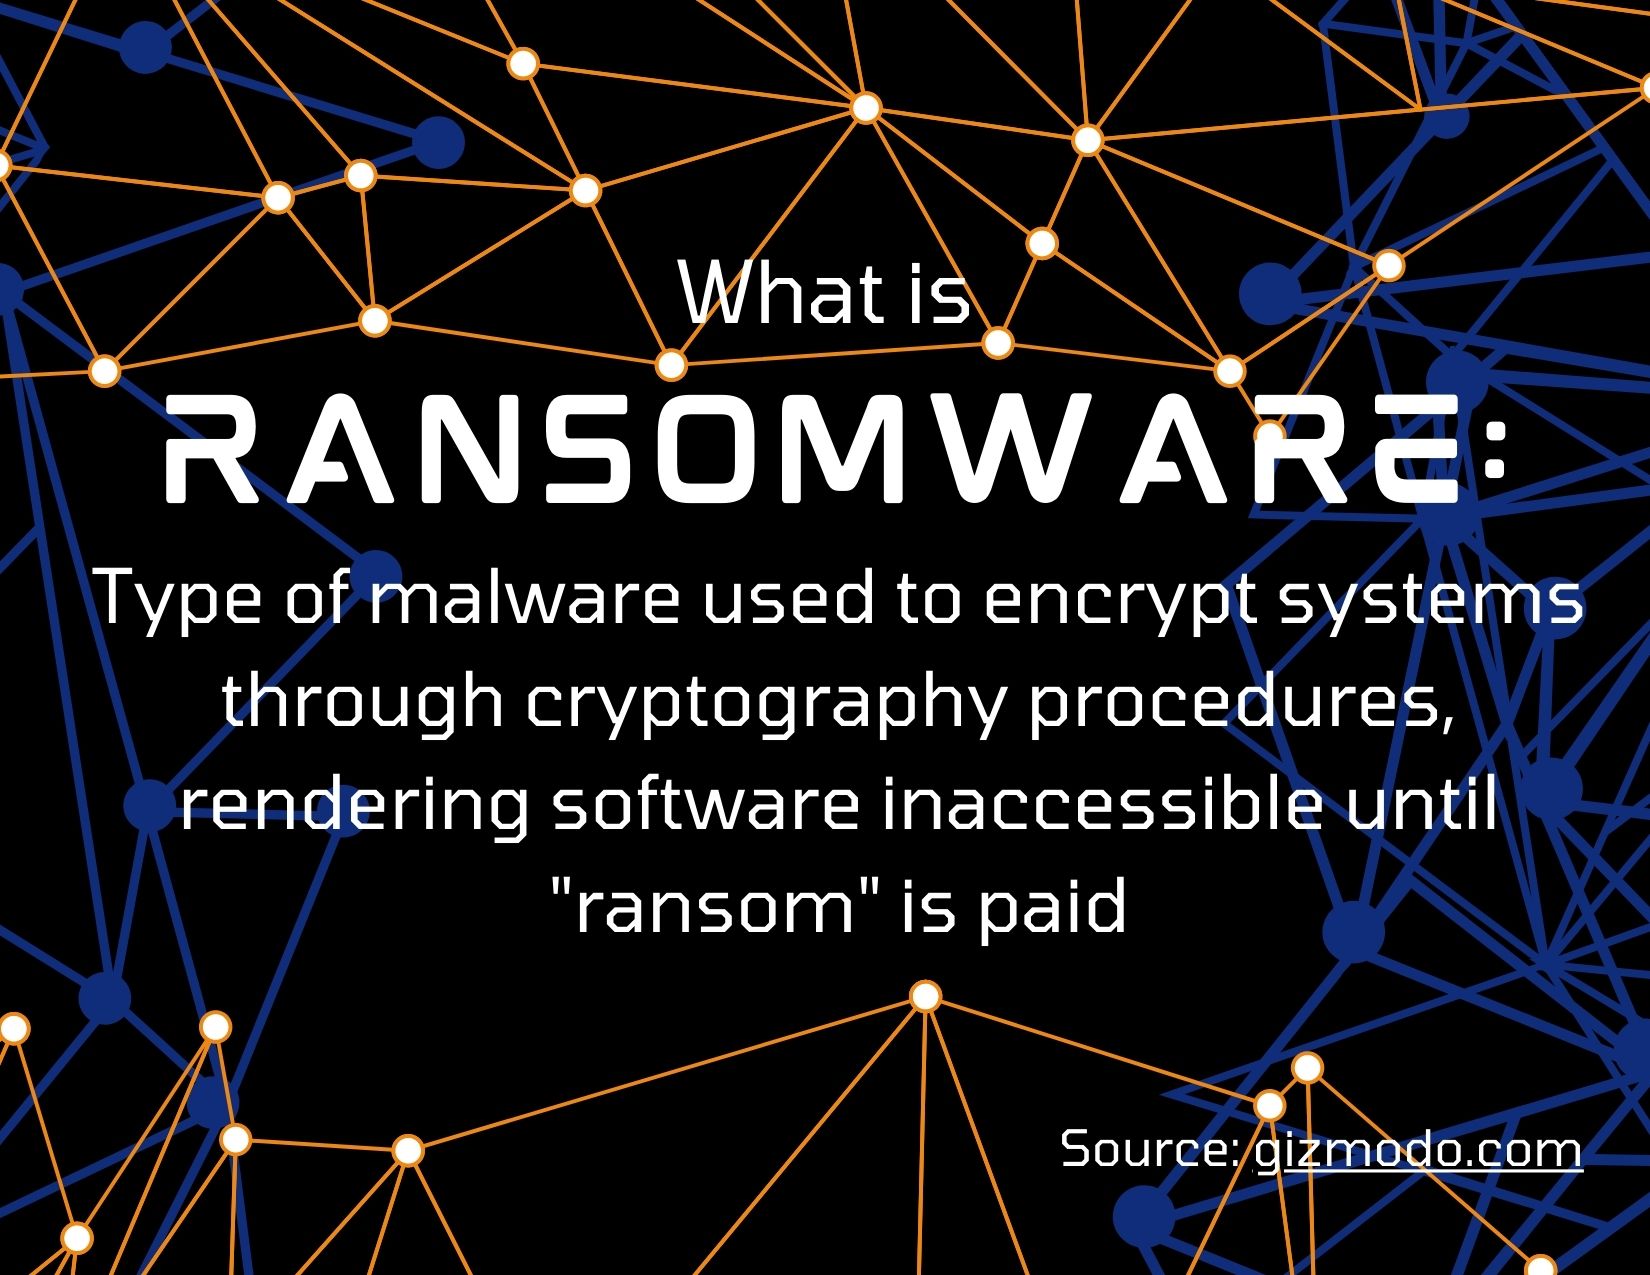 A Ransomware Cyber Attack Knocks US Manufacturer Off Production - Featured Image